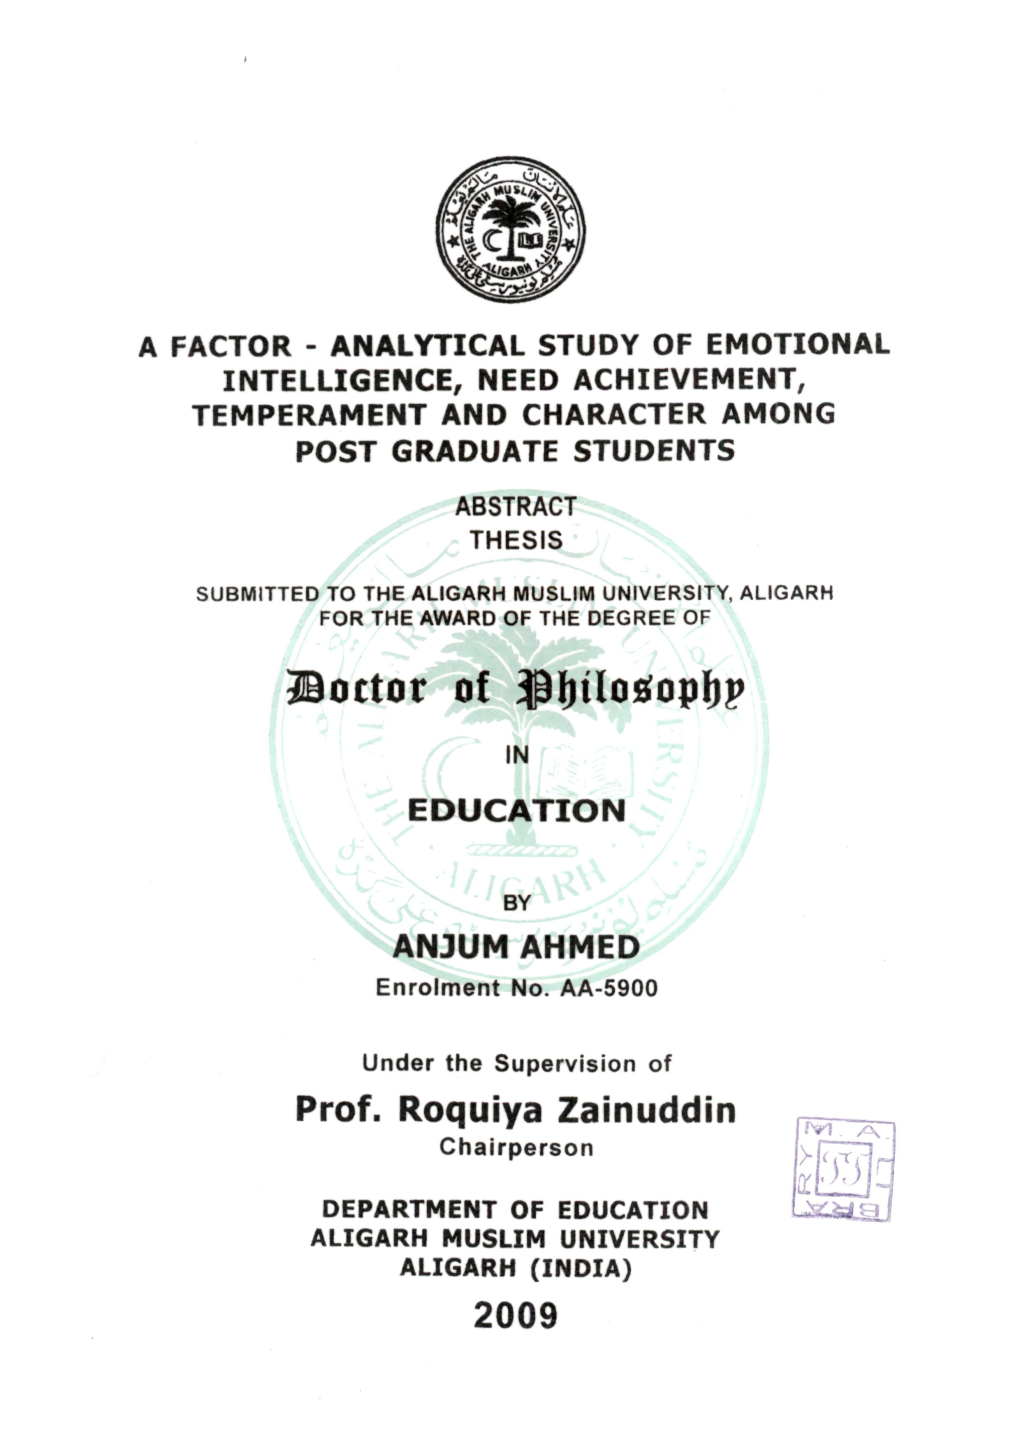 A Factor - Analytical Study of Emotional Intelligence, Need Achievement, Temperament and Character Among Post Graduate Students